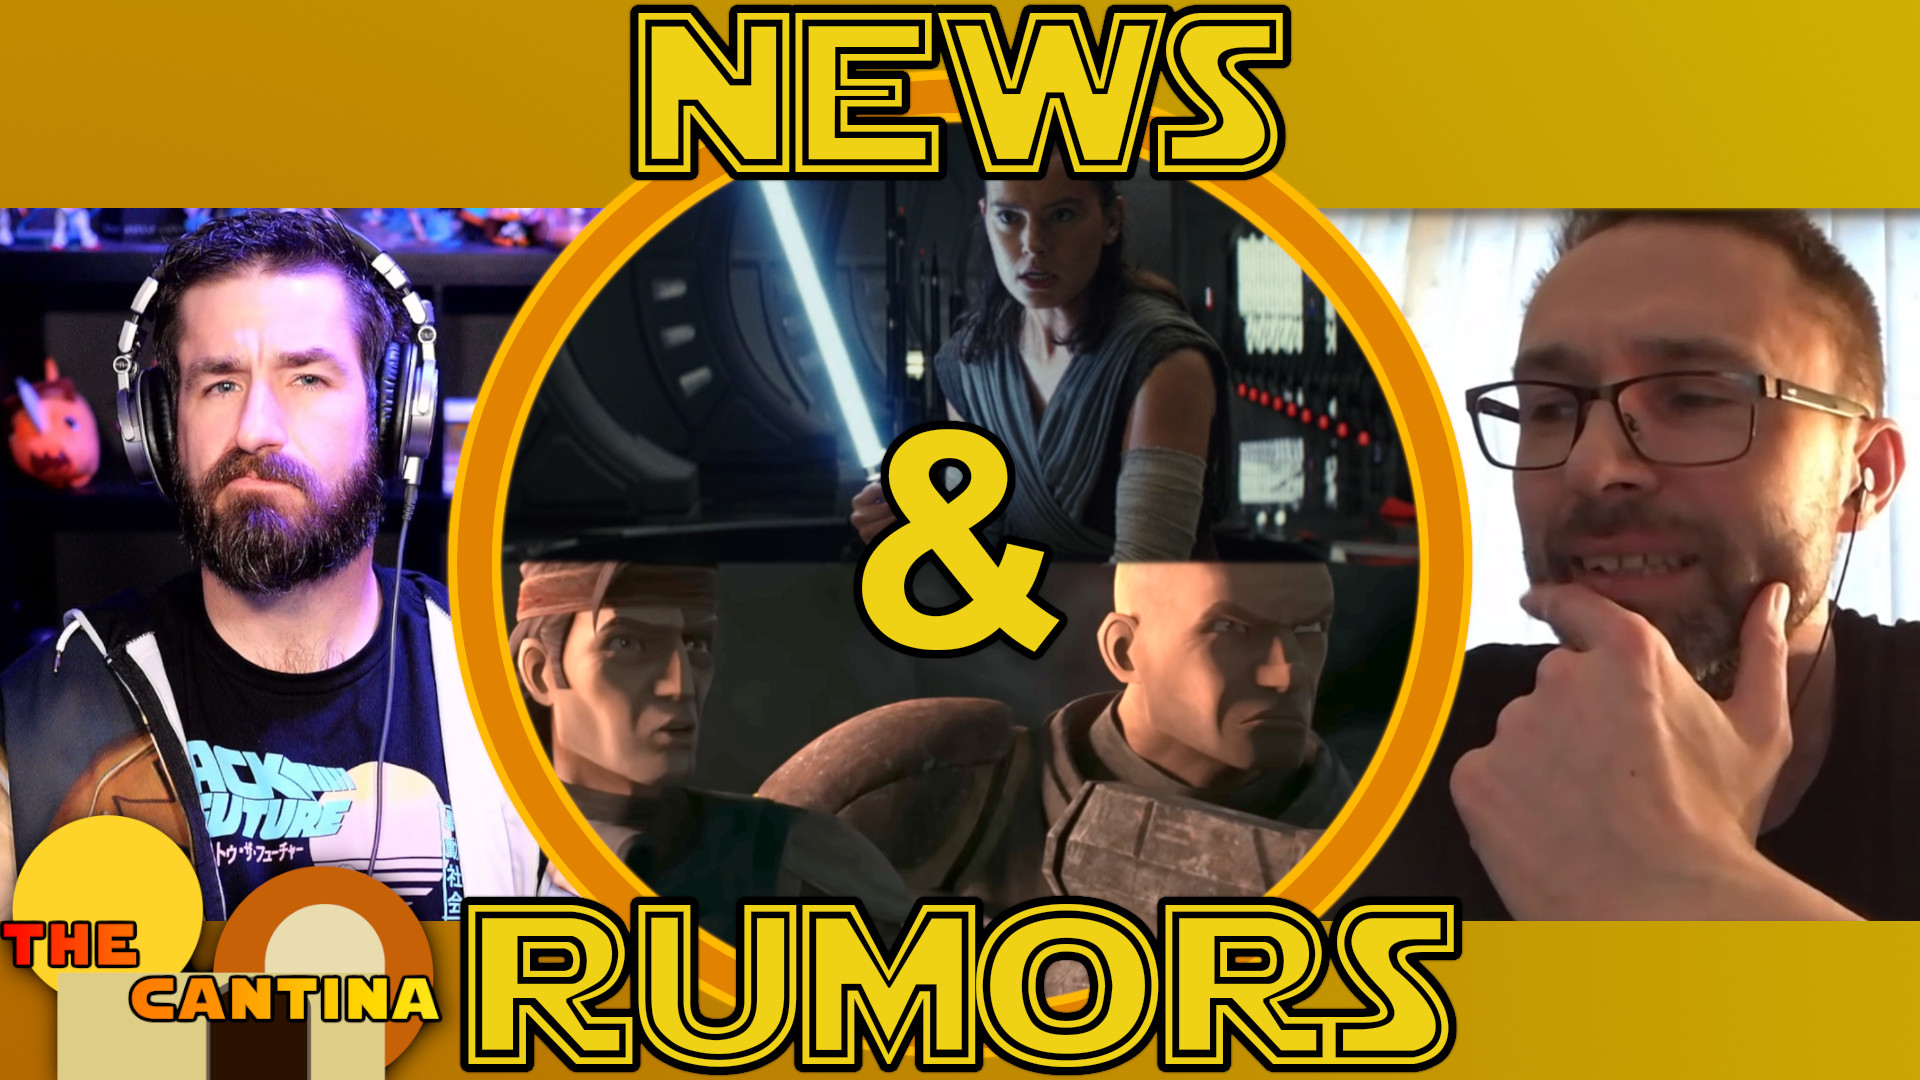 Star Wars News And Rumors Roundup & Bad Batch S3 Thoughts | TC